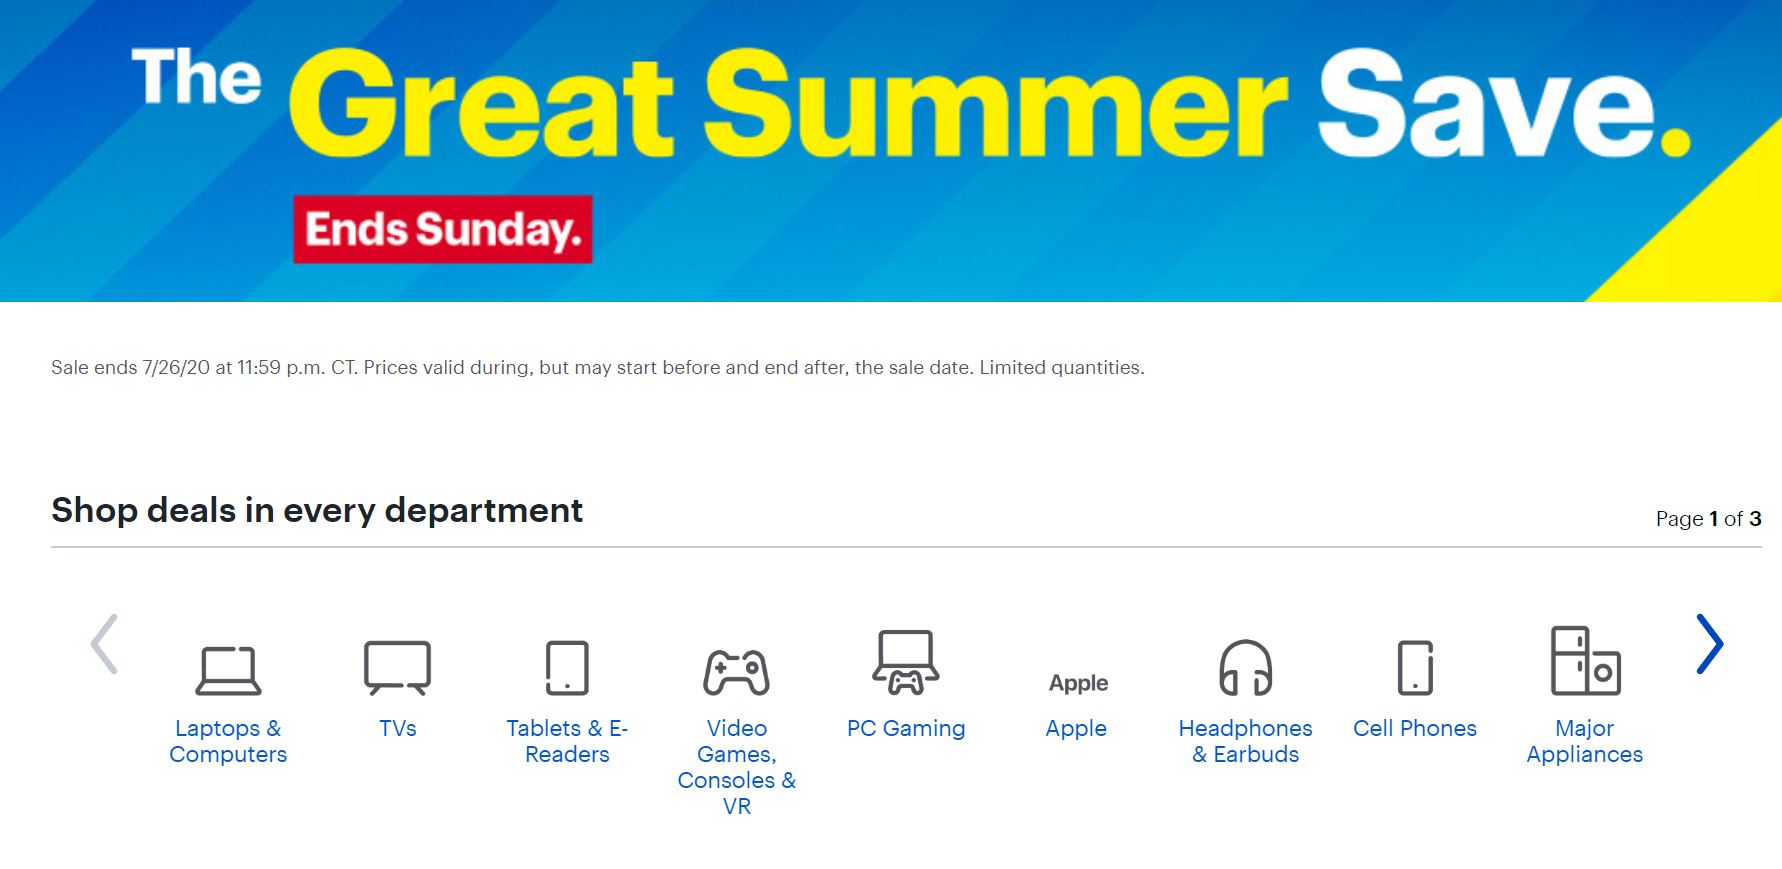 Best Buy Great Summer Save